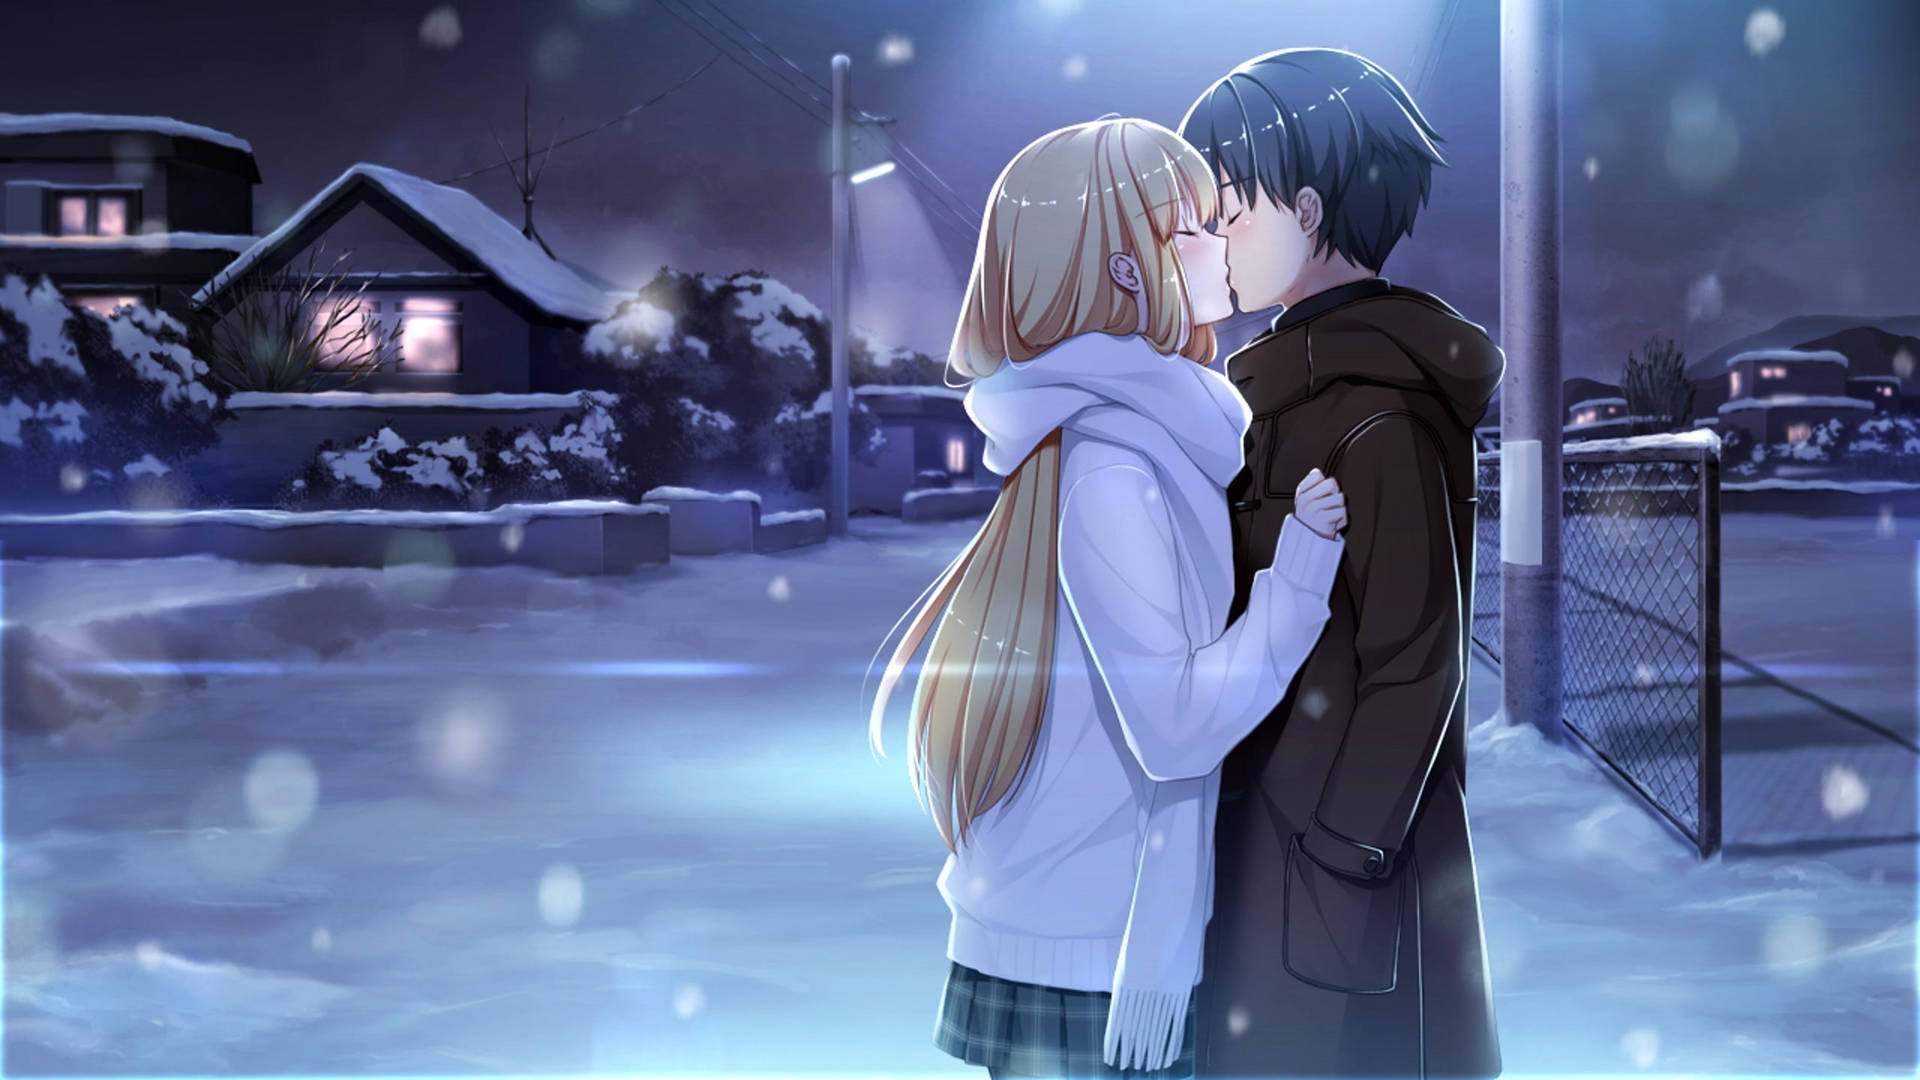 Anime Couple Kiss Under The Snow Wallpaper